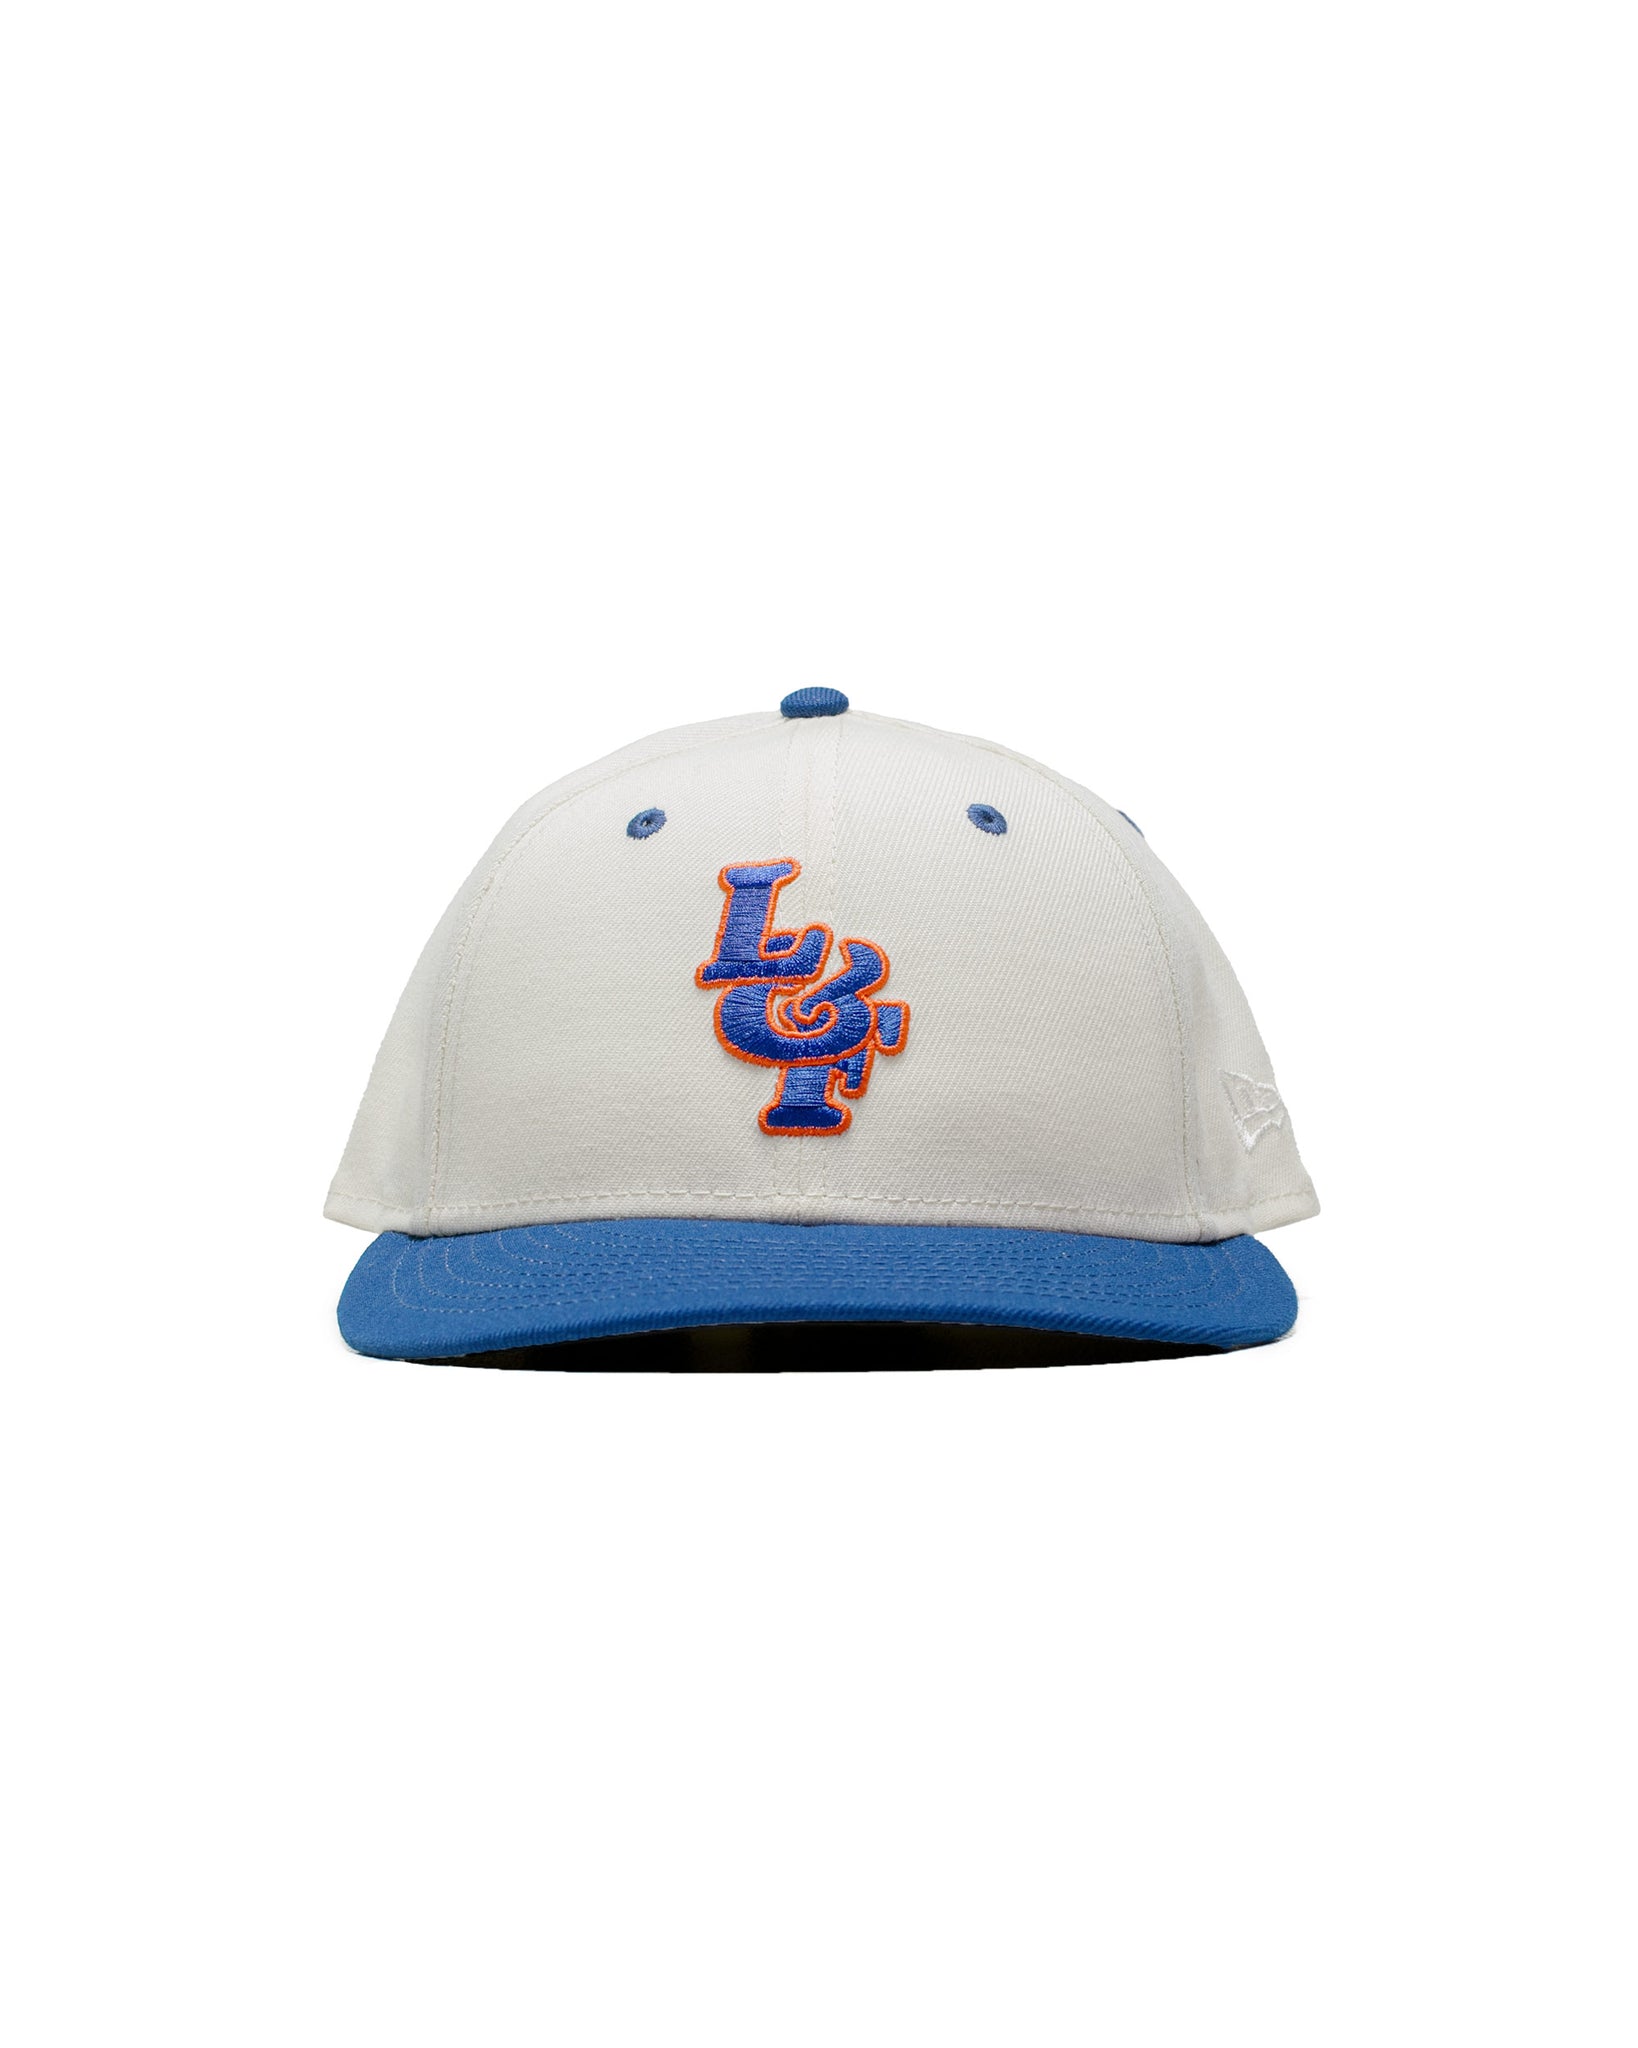 New Era - 59Fifty Fitted - Low Profile - Authentic On-Field Fauxback Cap 